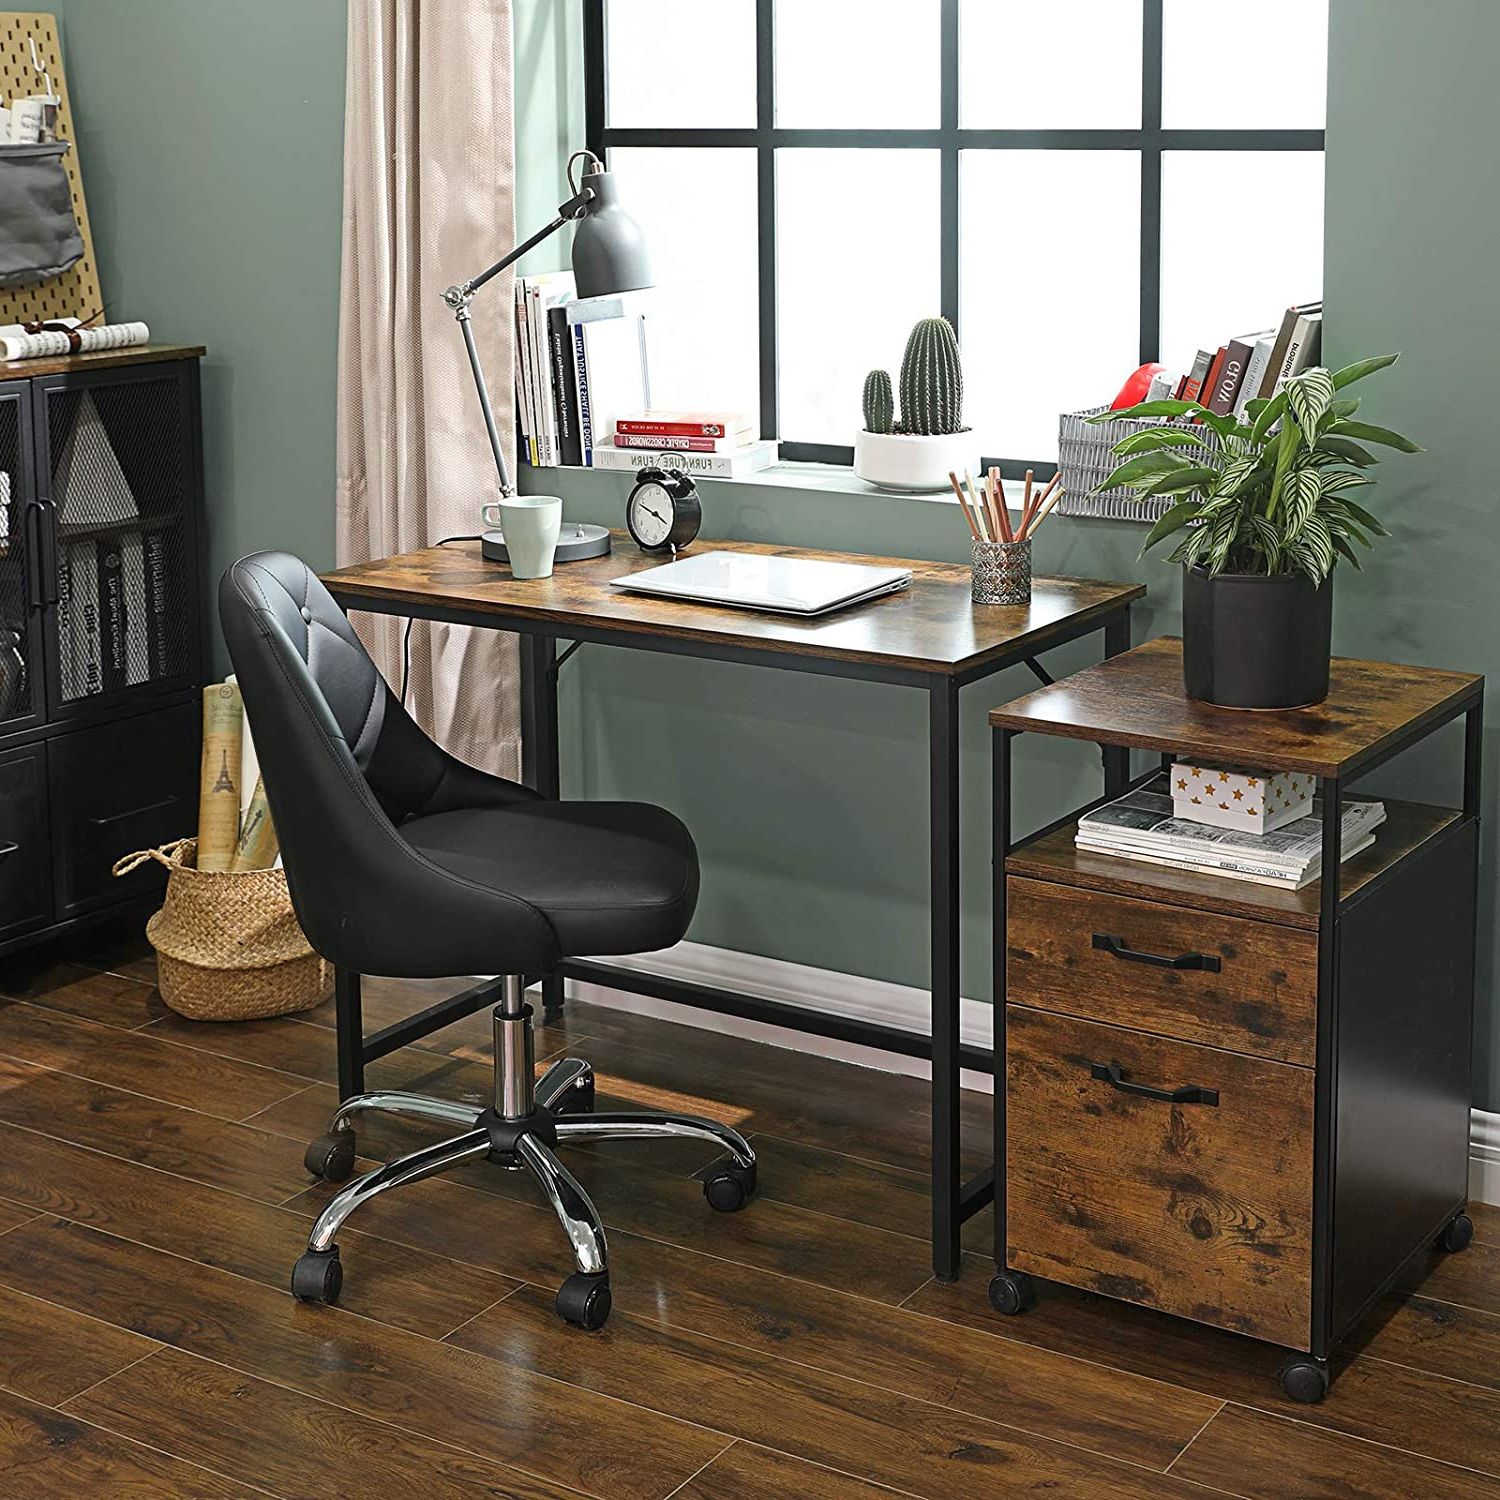 Black Metal And Rustic Wood Office Desks Inside Fashionable Vasagle Writing Desk, Computer Desk, Small Office Table, 100 X 50 X  (View 3 of 15)